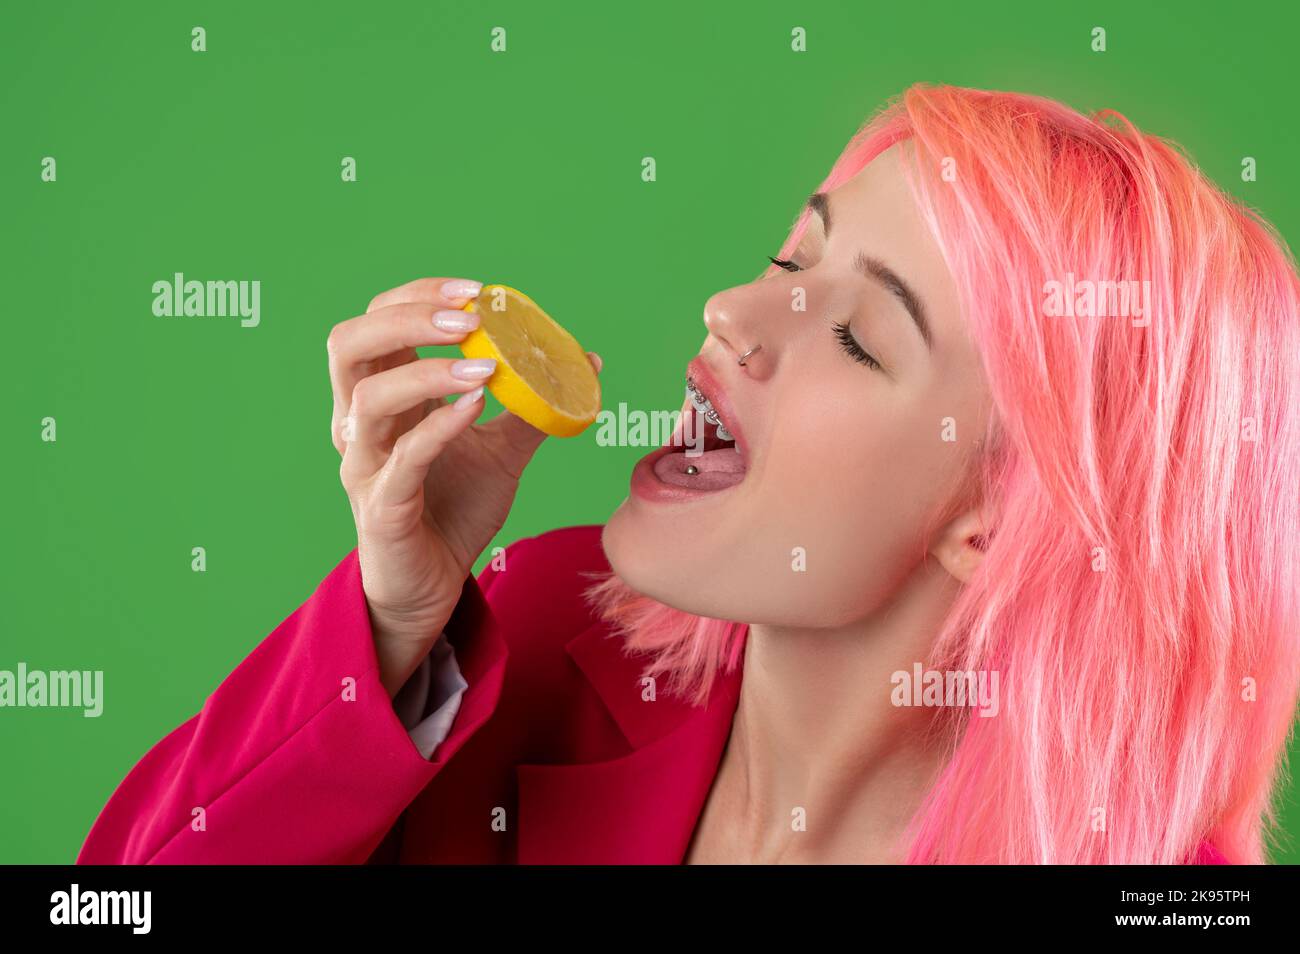 Girl eating the lemon slice in front of the camera Stock Photo